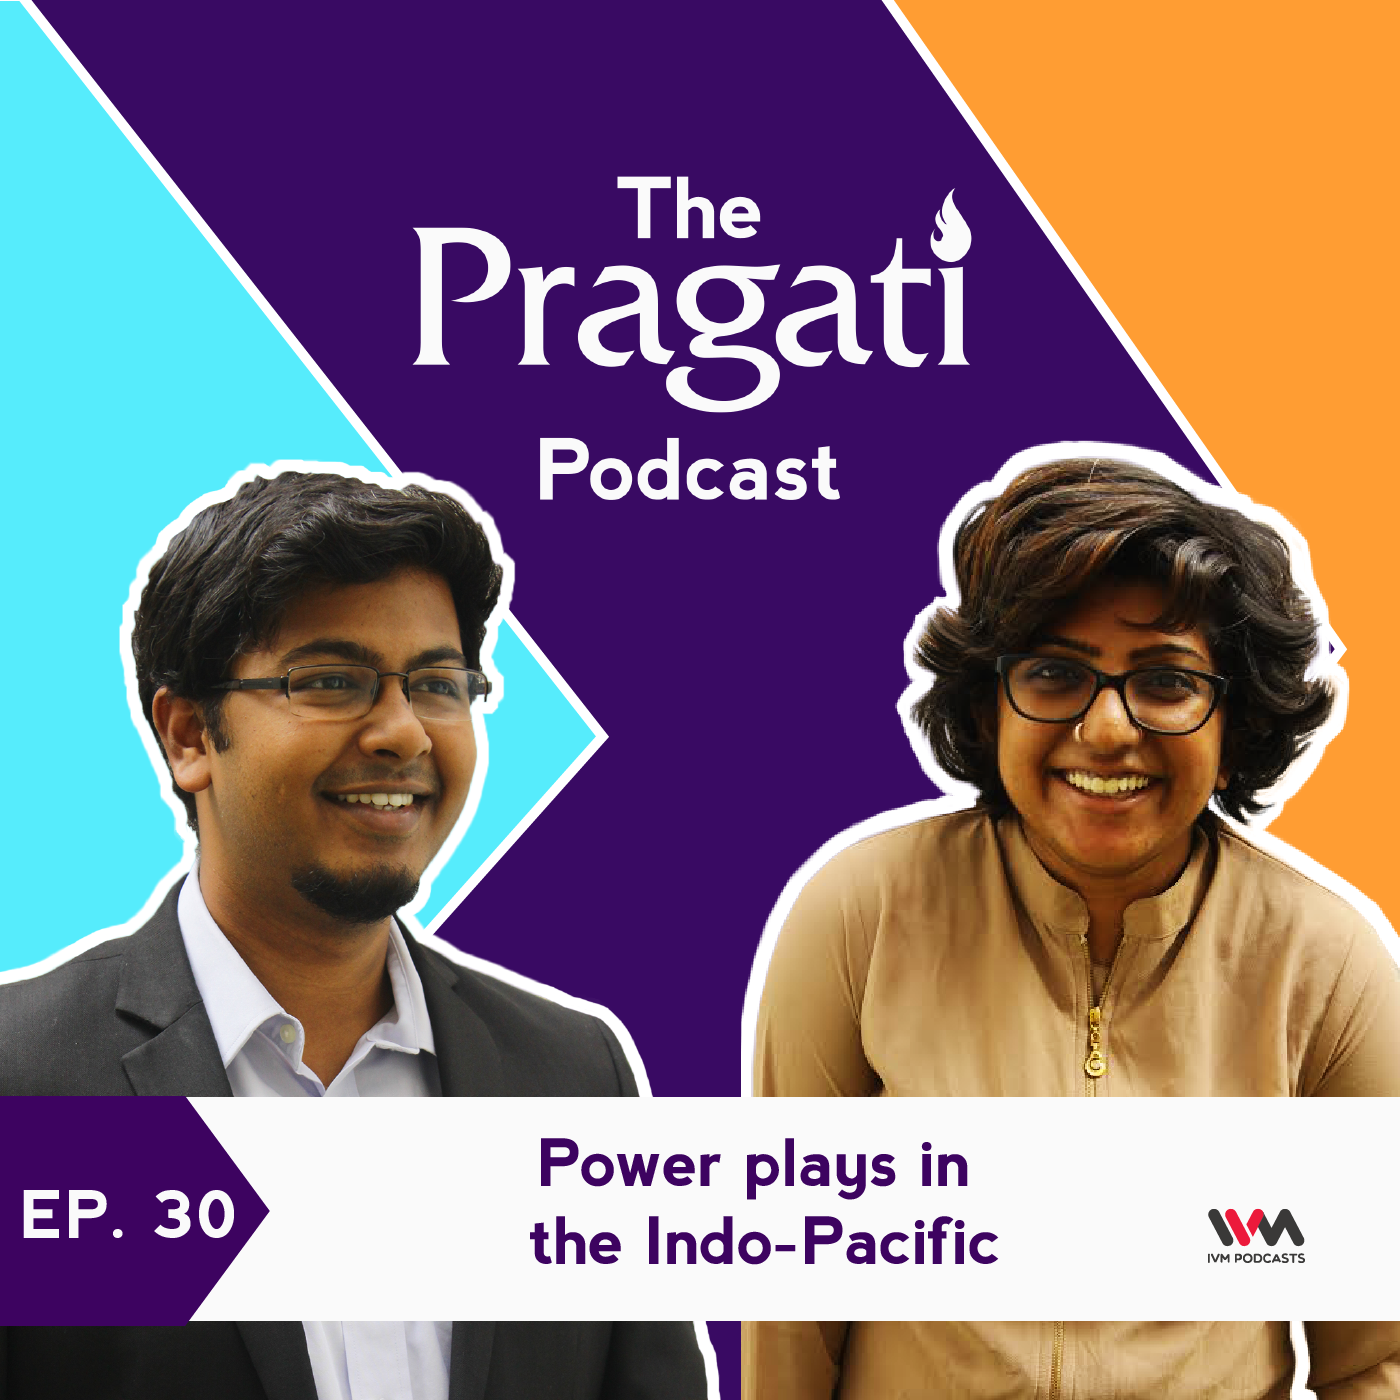 Ep. 30: Power plays in the Indo-Pacific